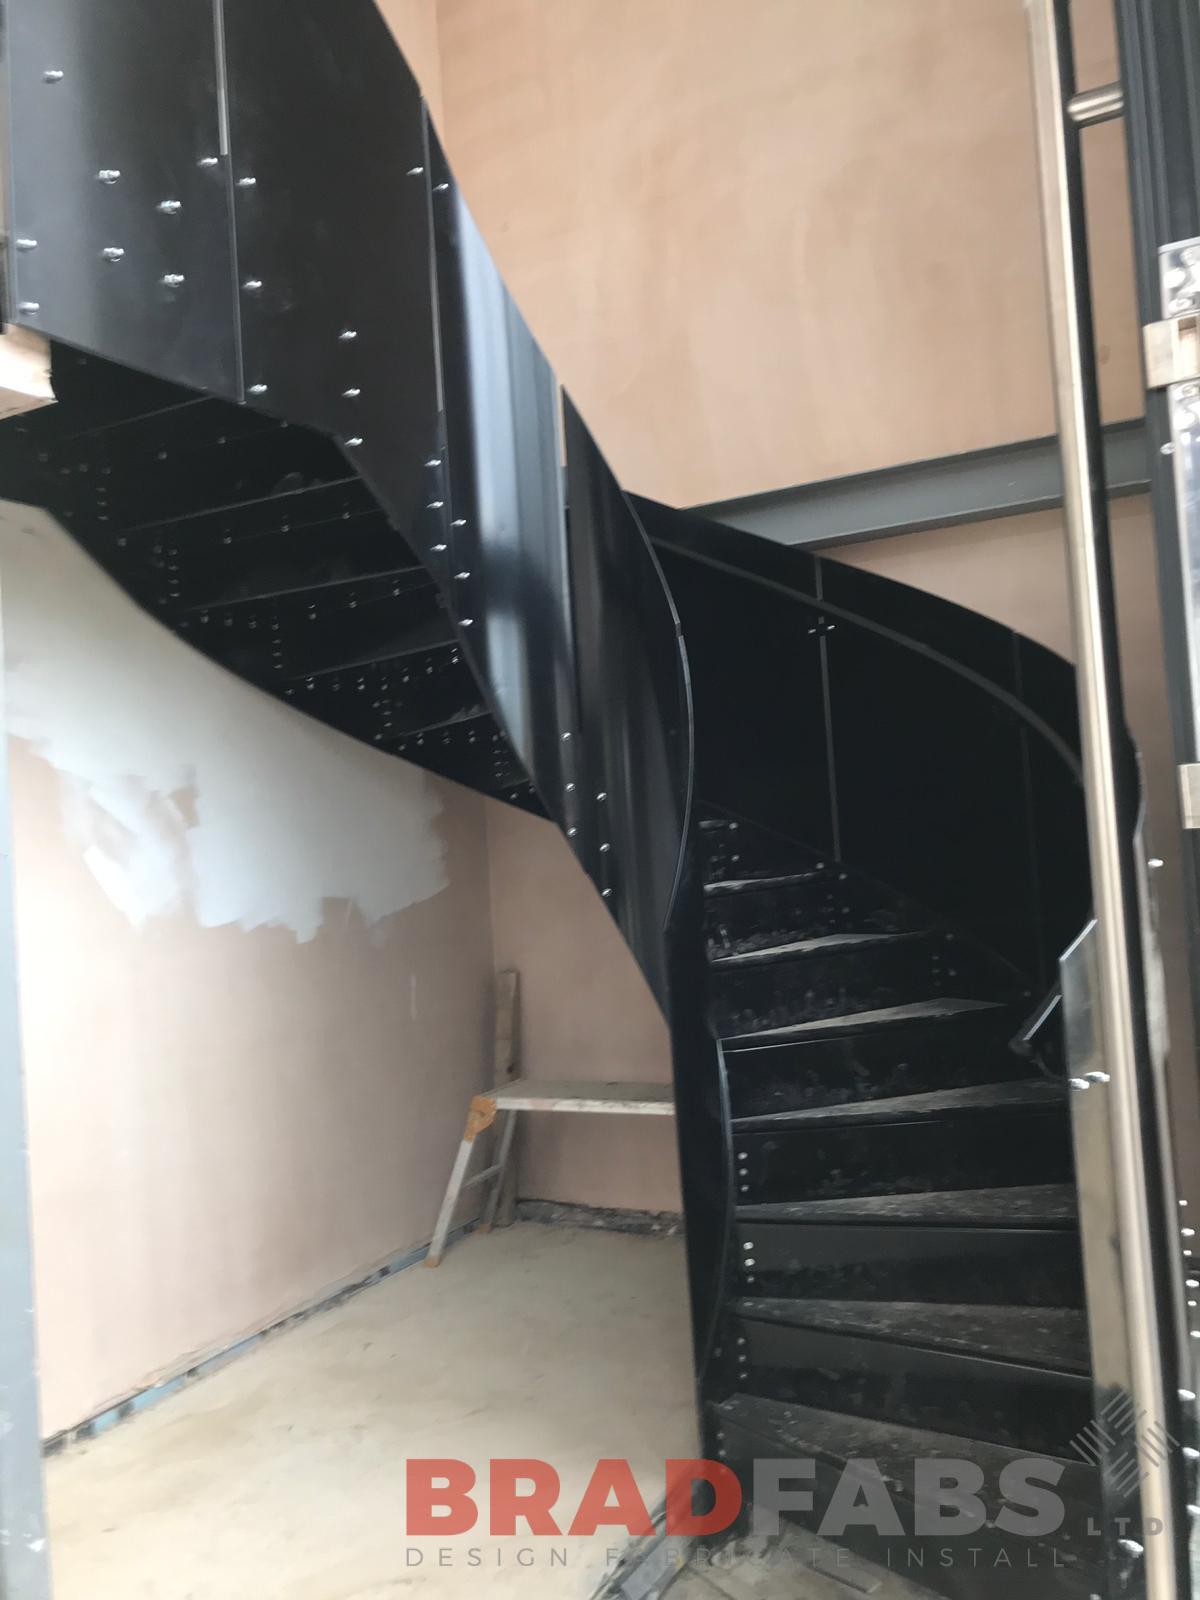 Bradfabs, helix staircase, helical staircase, internal staircase, powder coated black, steel staircase, steel structure, bespoke product